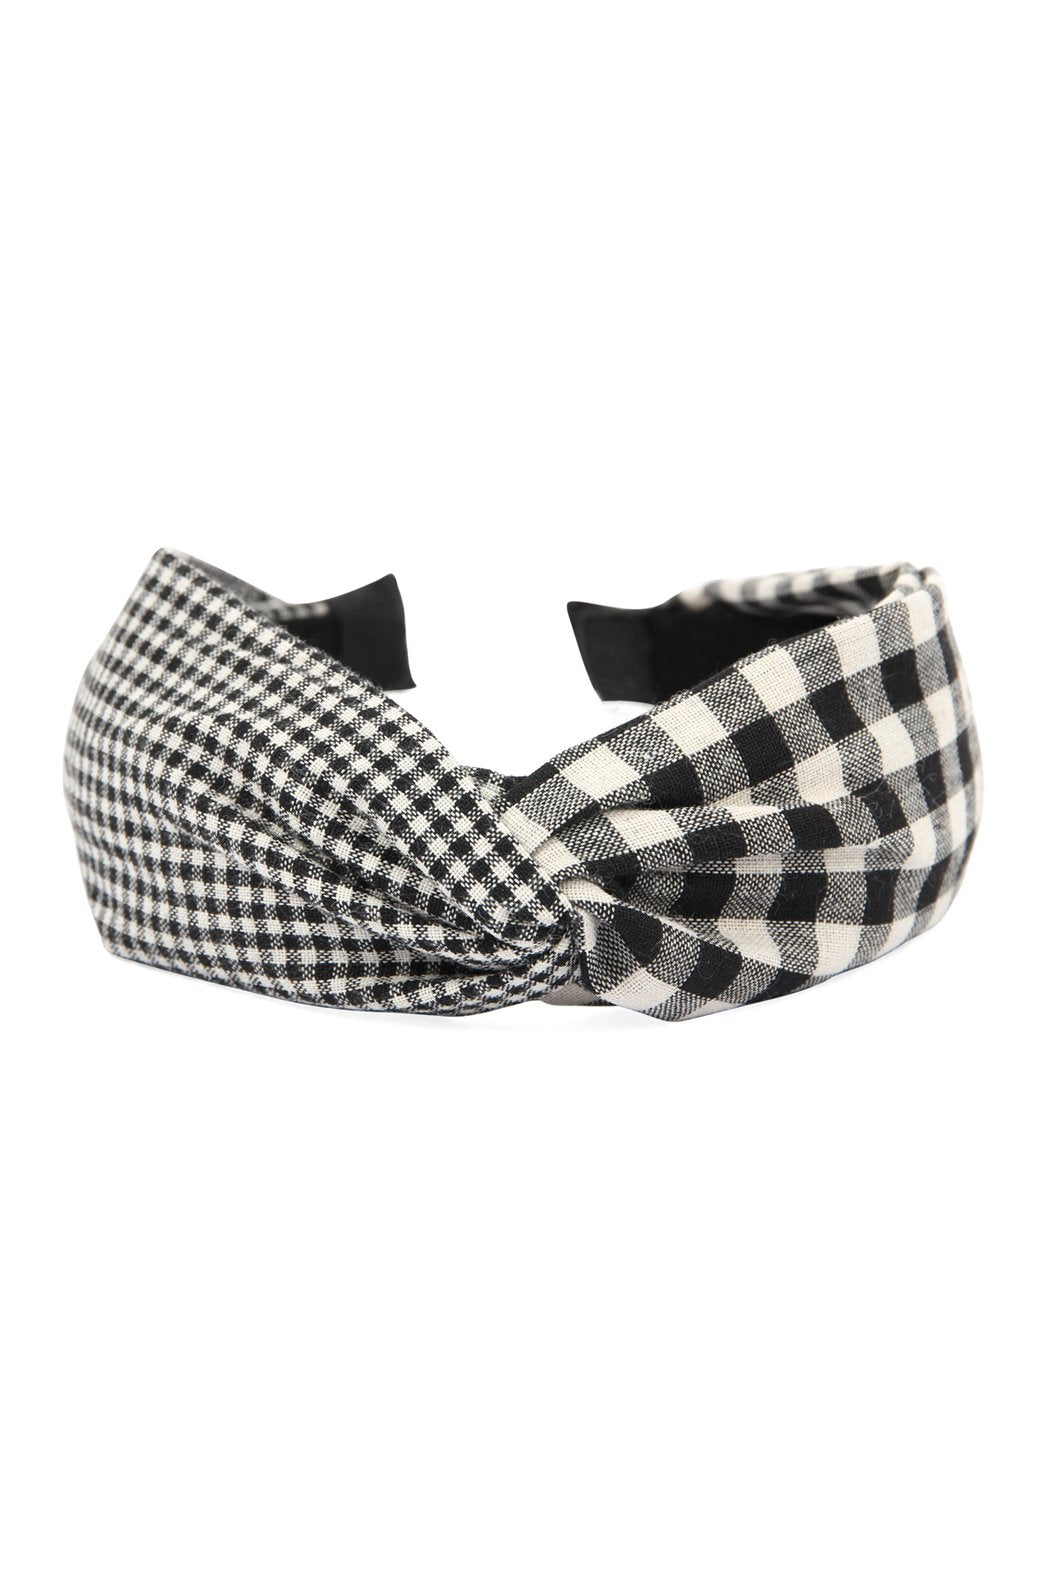 Hdh2367 - Plaid Knotted Fabric Coated Hair Band